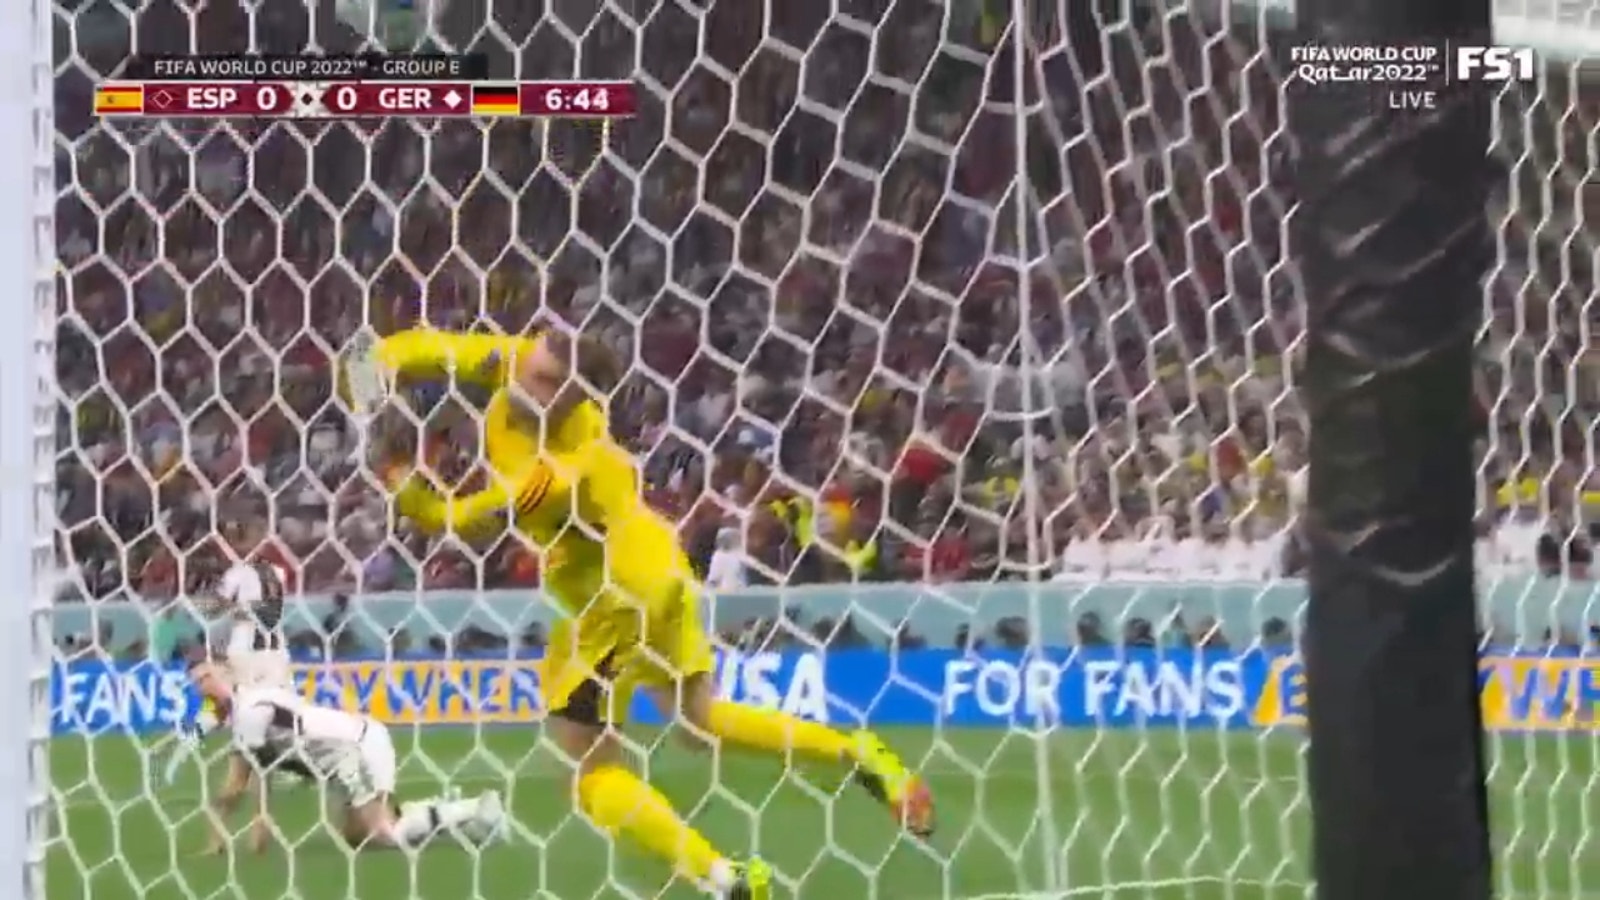 Germany's Manuel Neuer makes unreal save against Spain